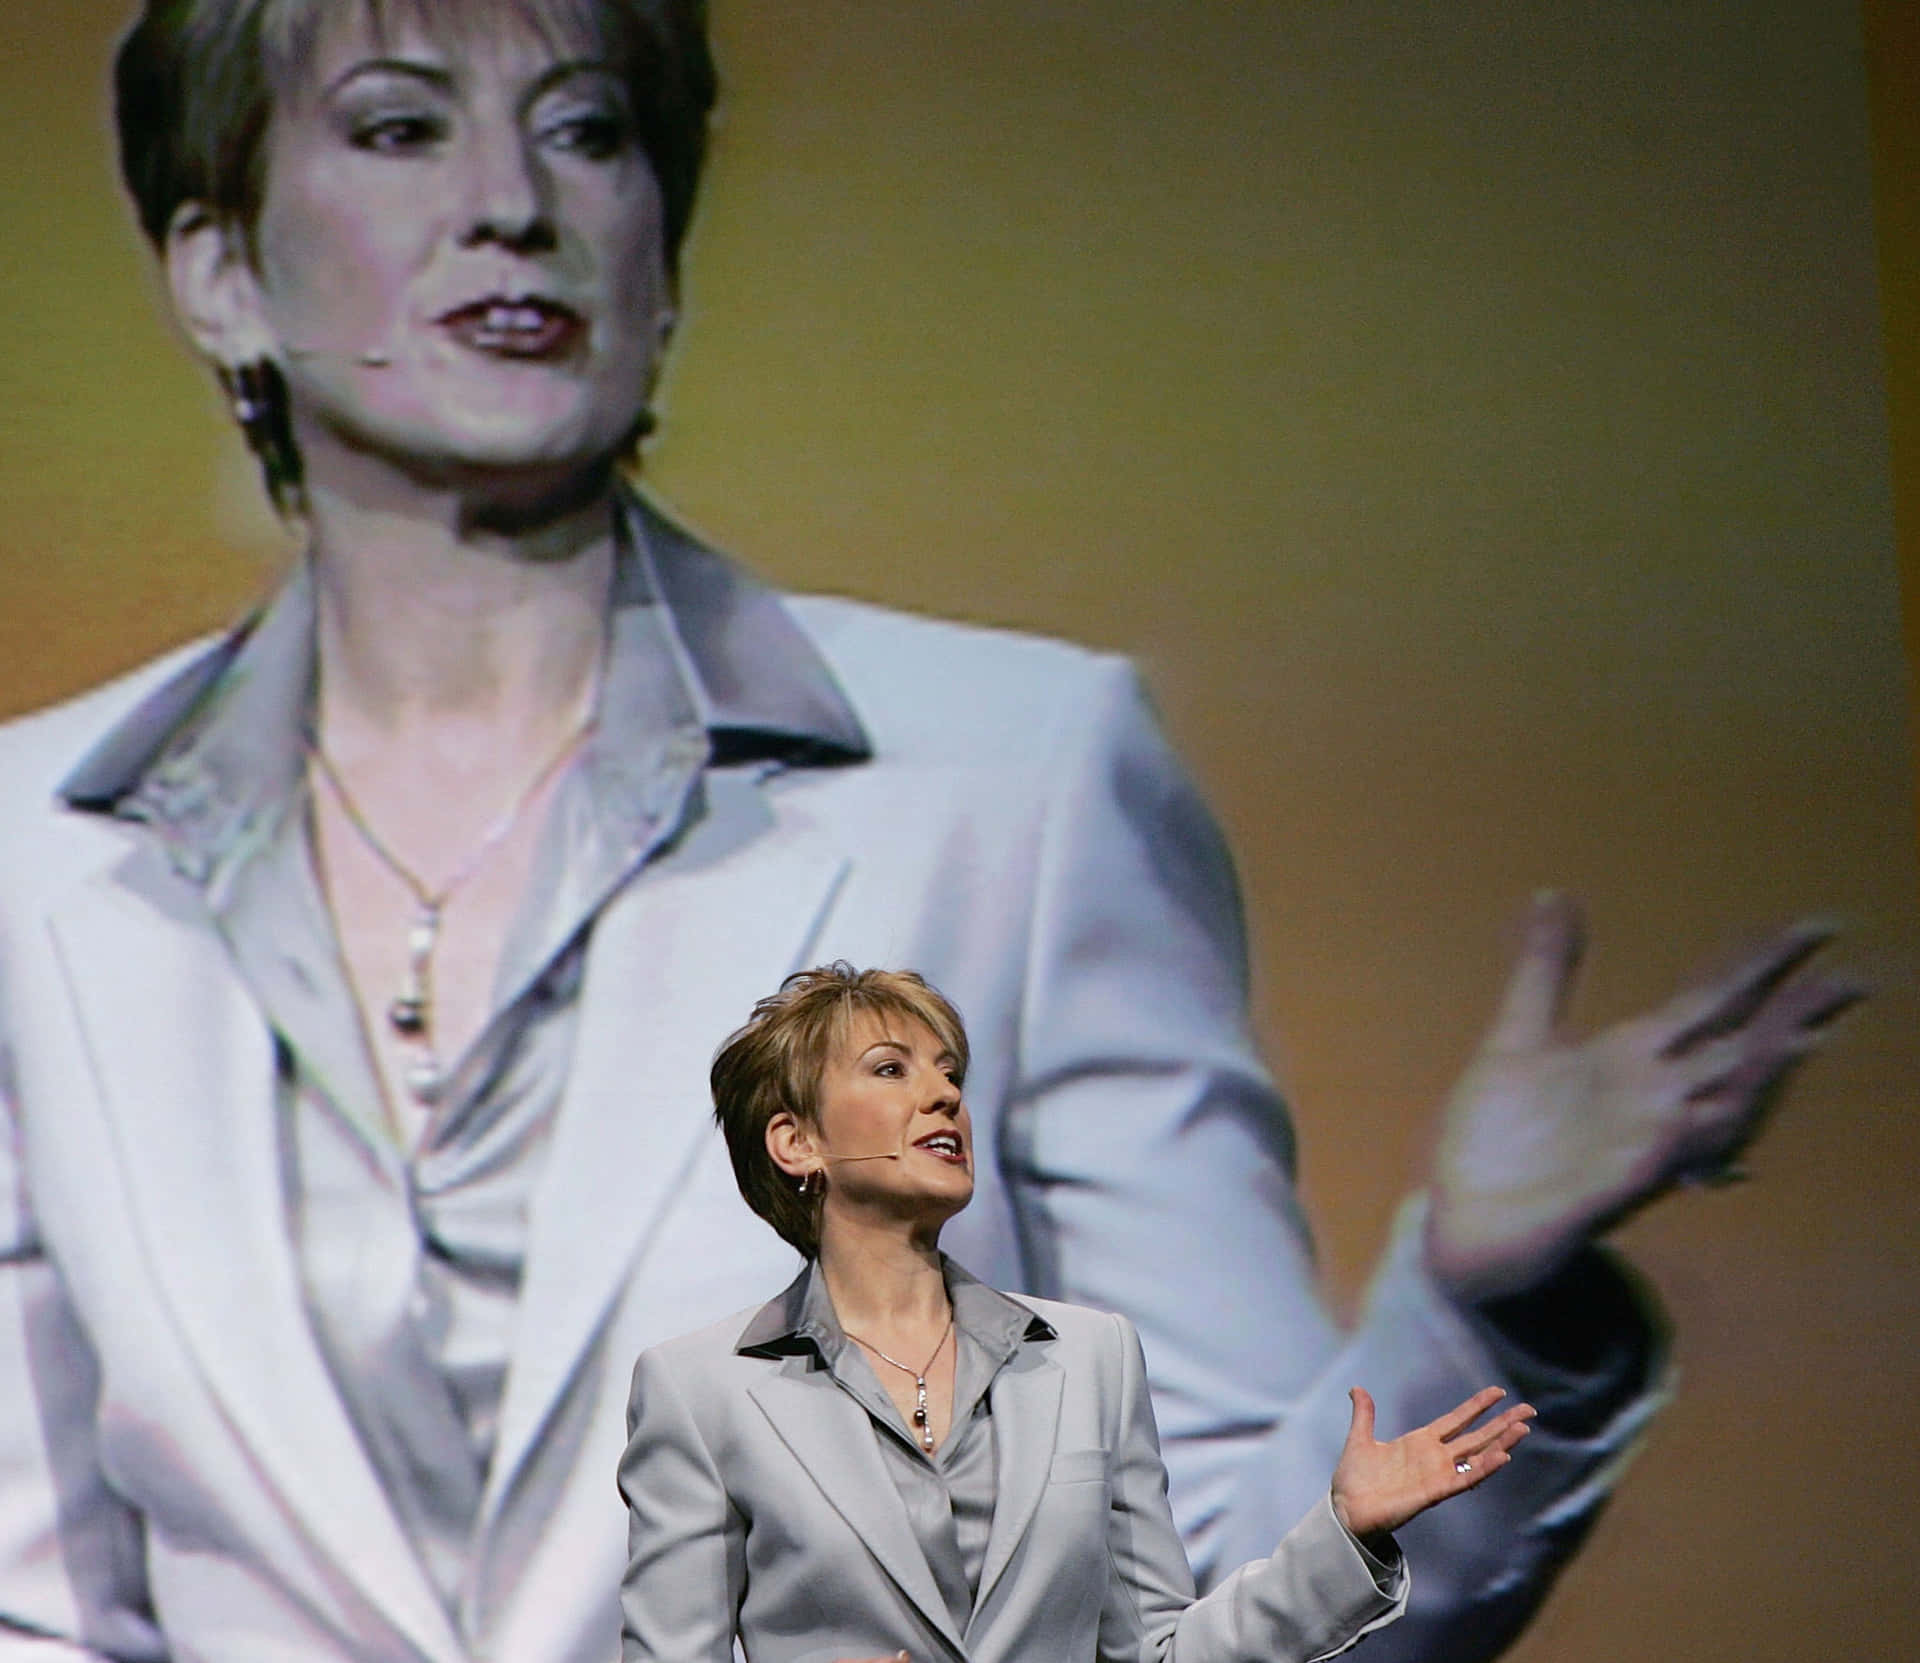 Carly Fiorina adorns a classy silver outfit Wallpaper